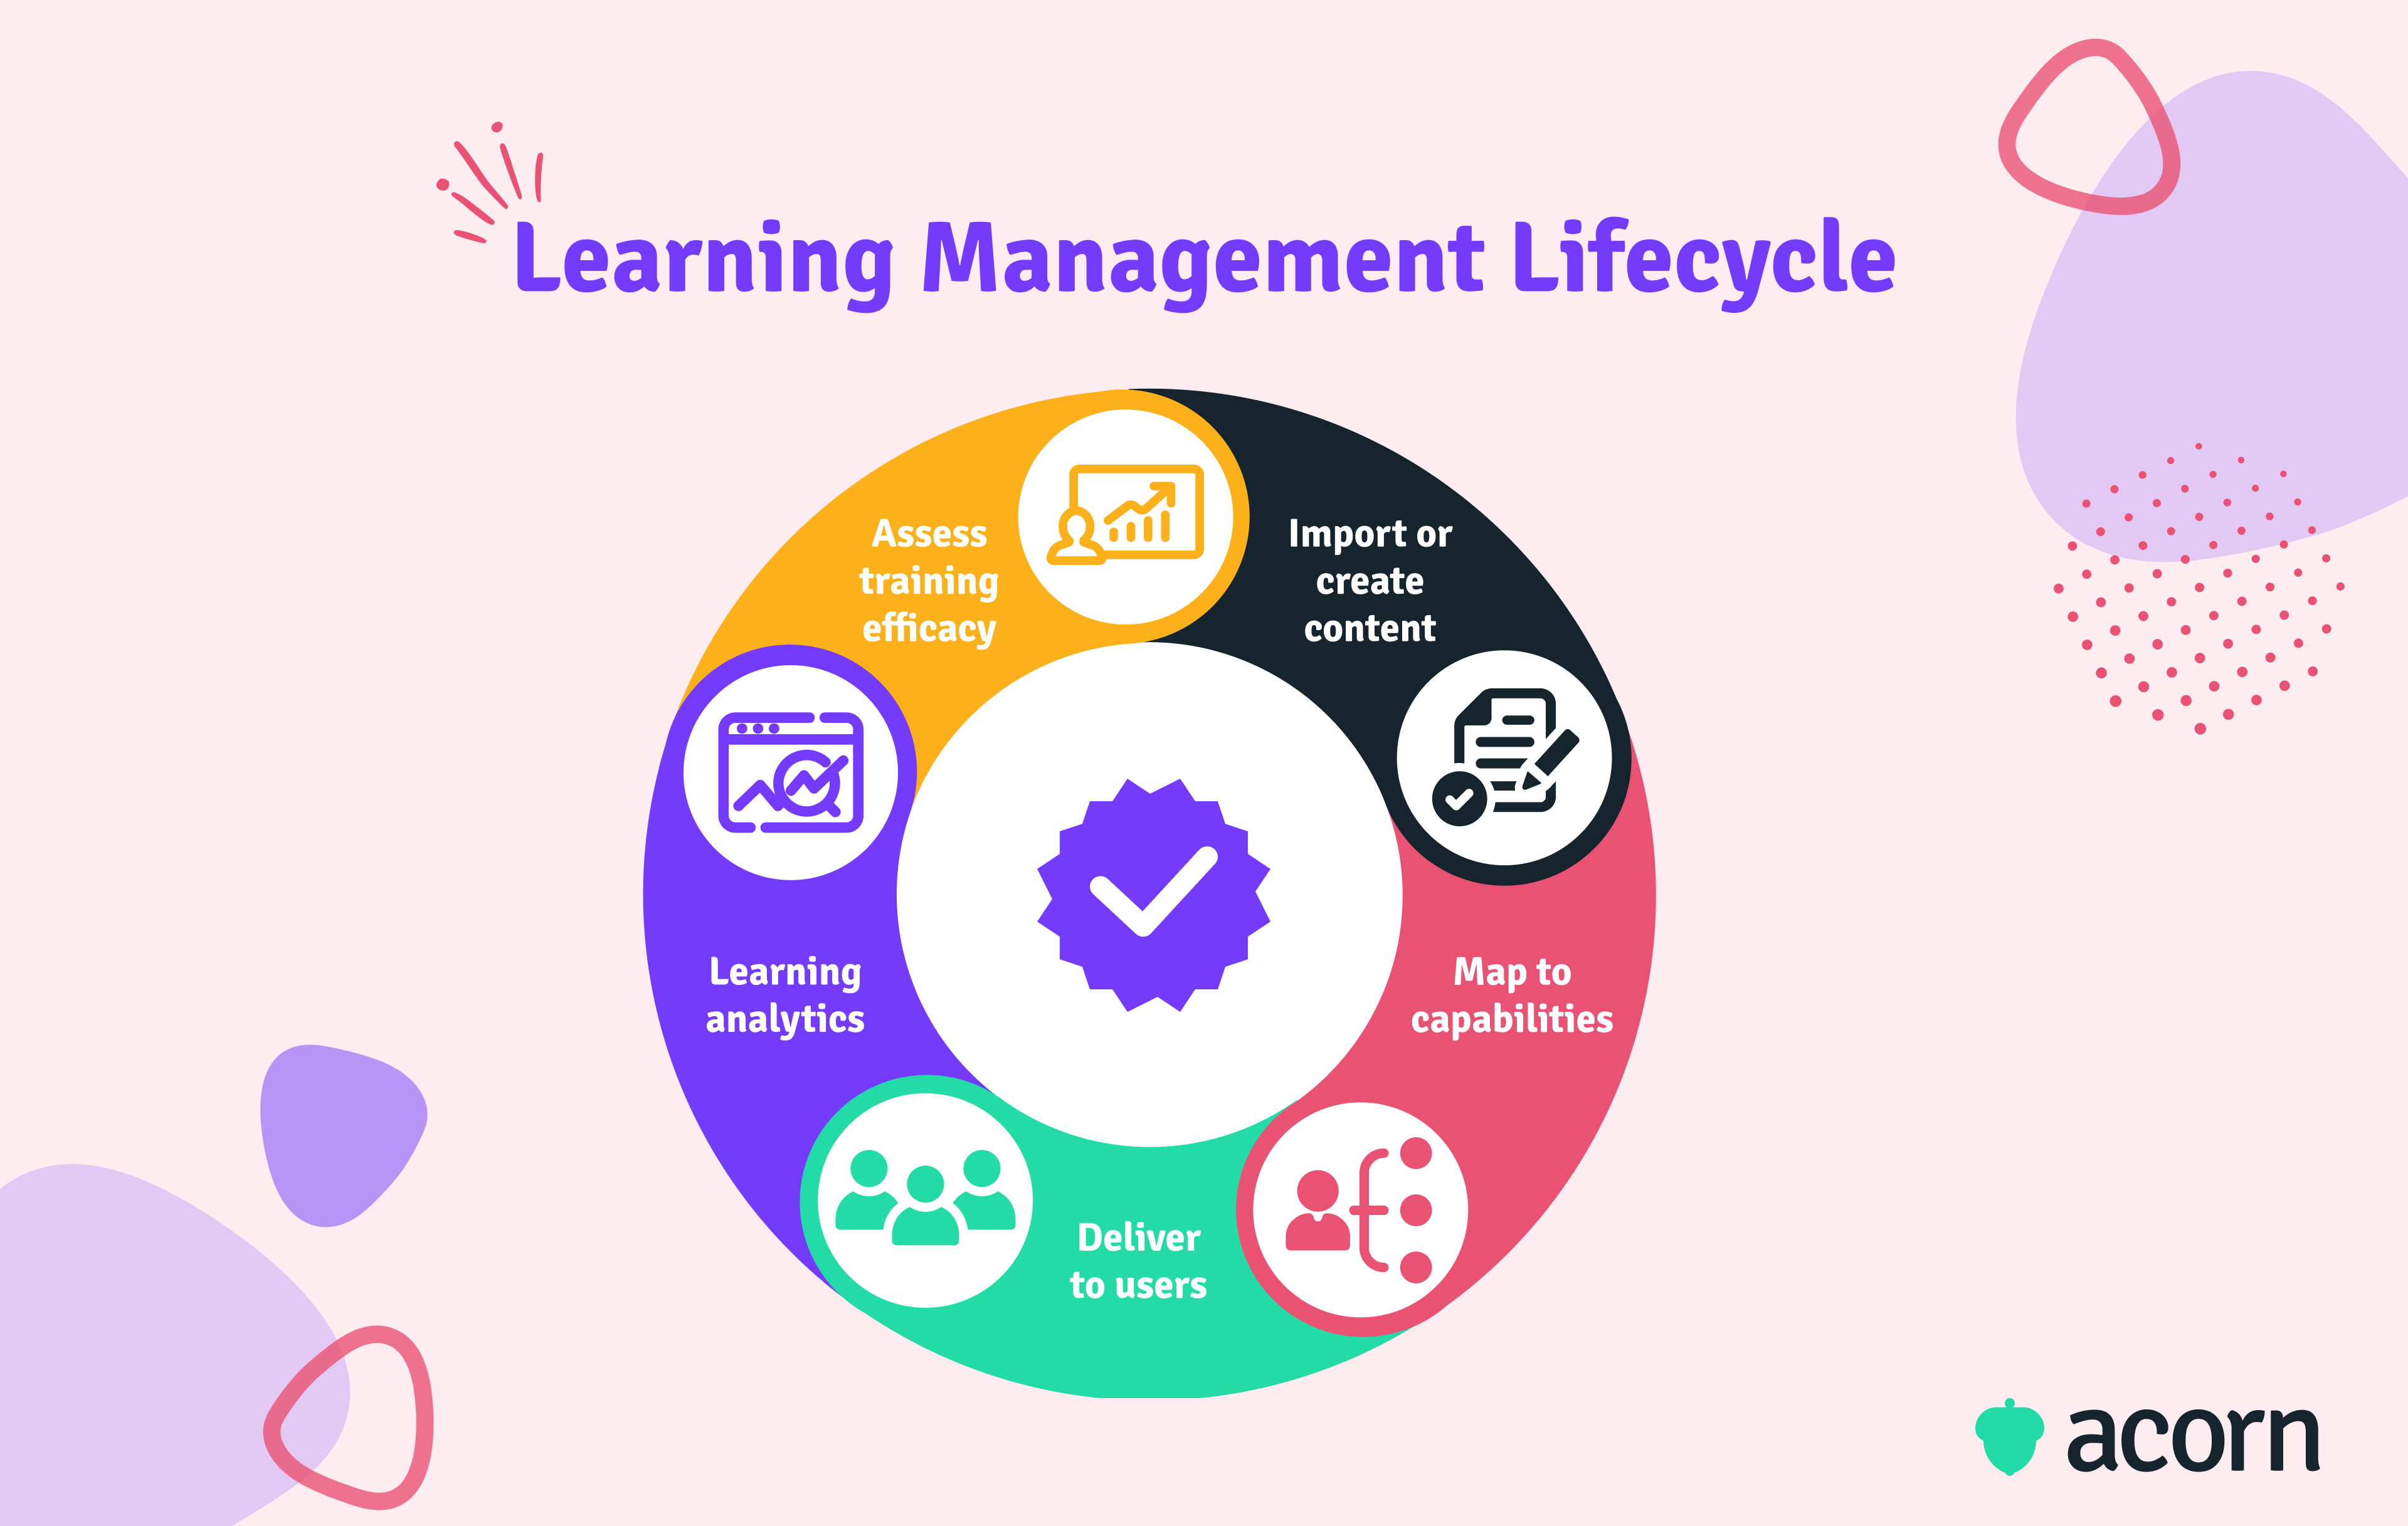 Cyclical infographic depicting the learning management lifecycle in an LMS